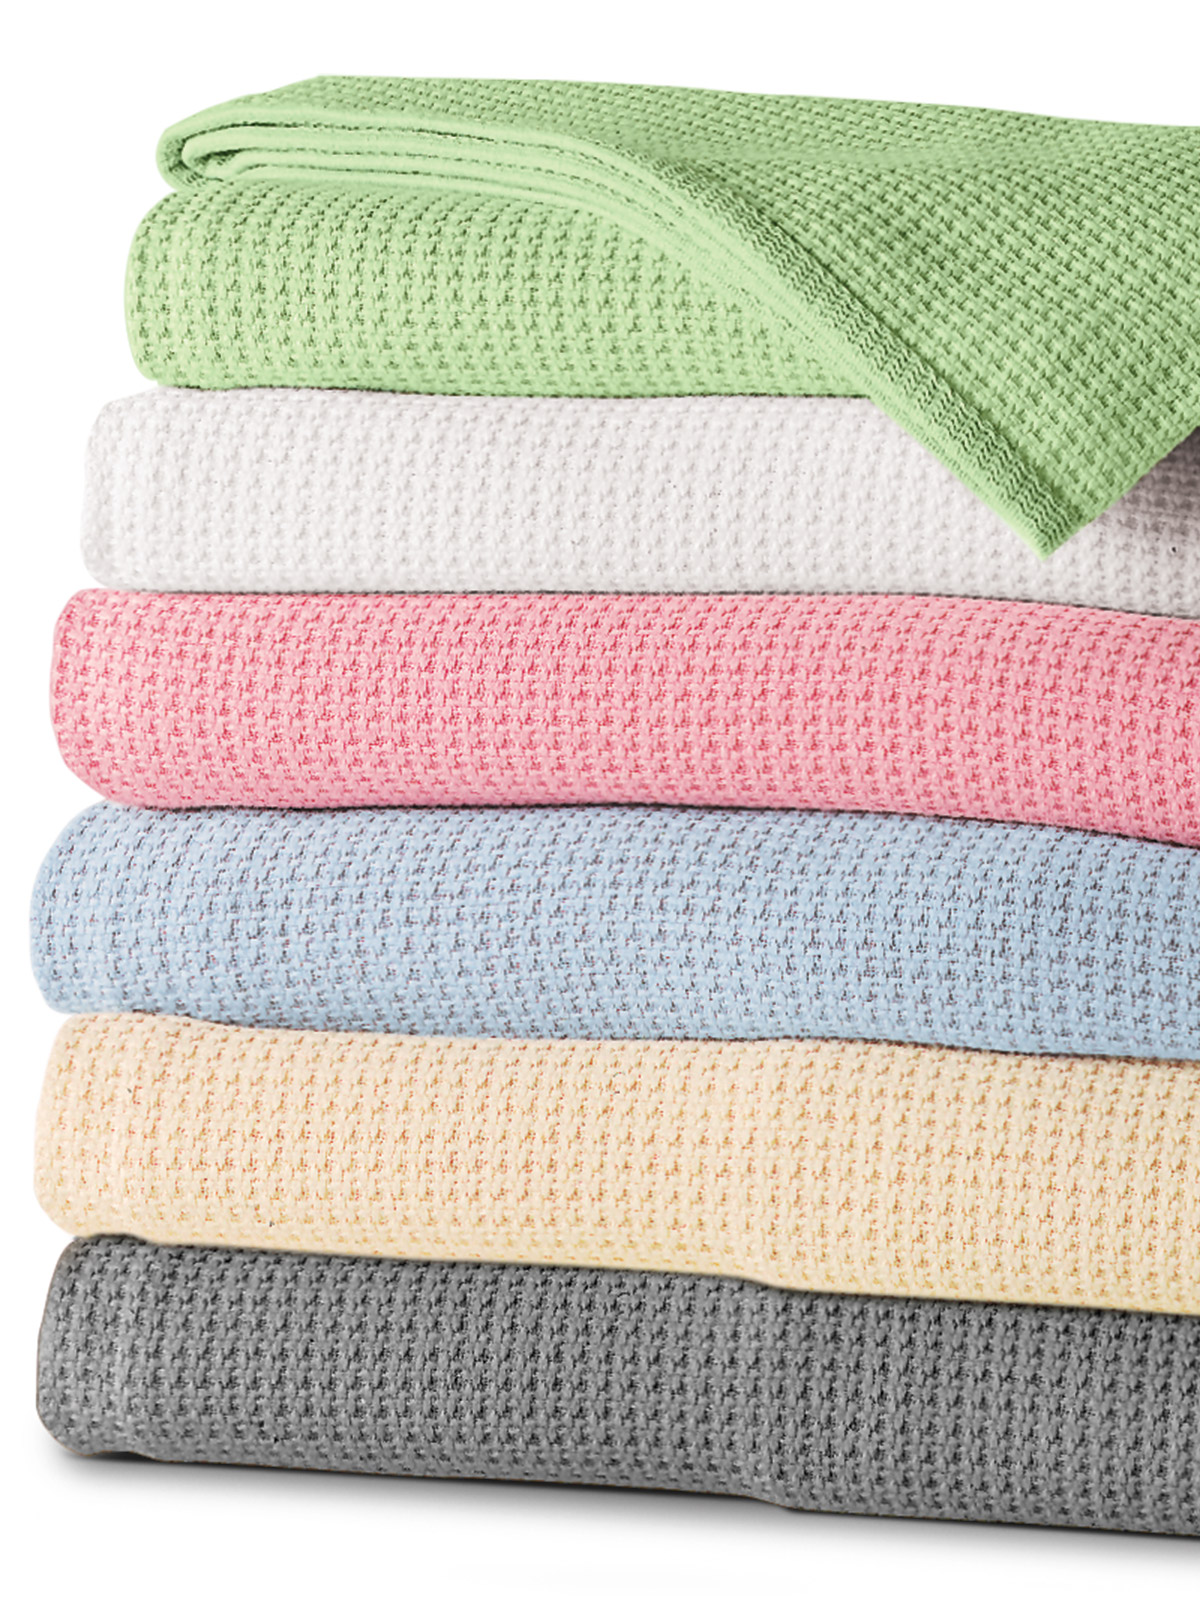 Image of Cotton Thermal Blankets